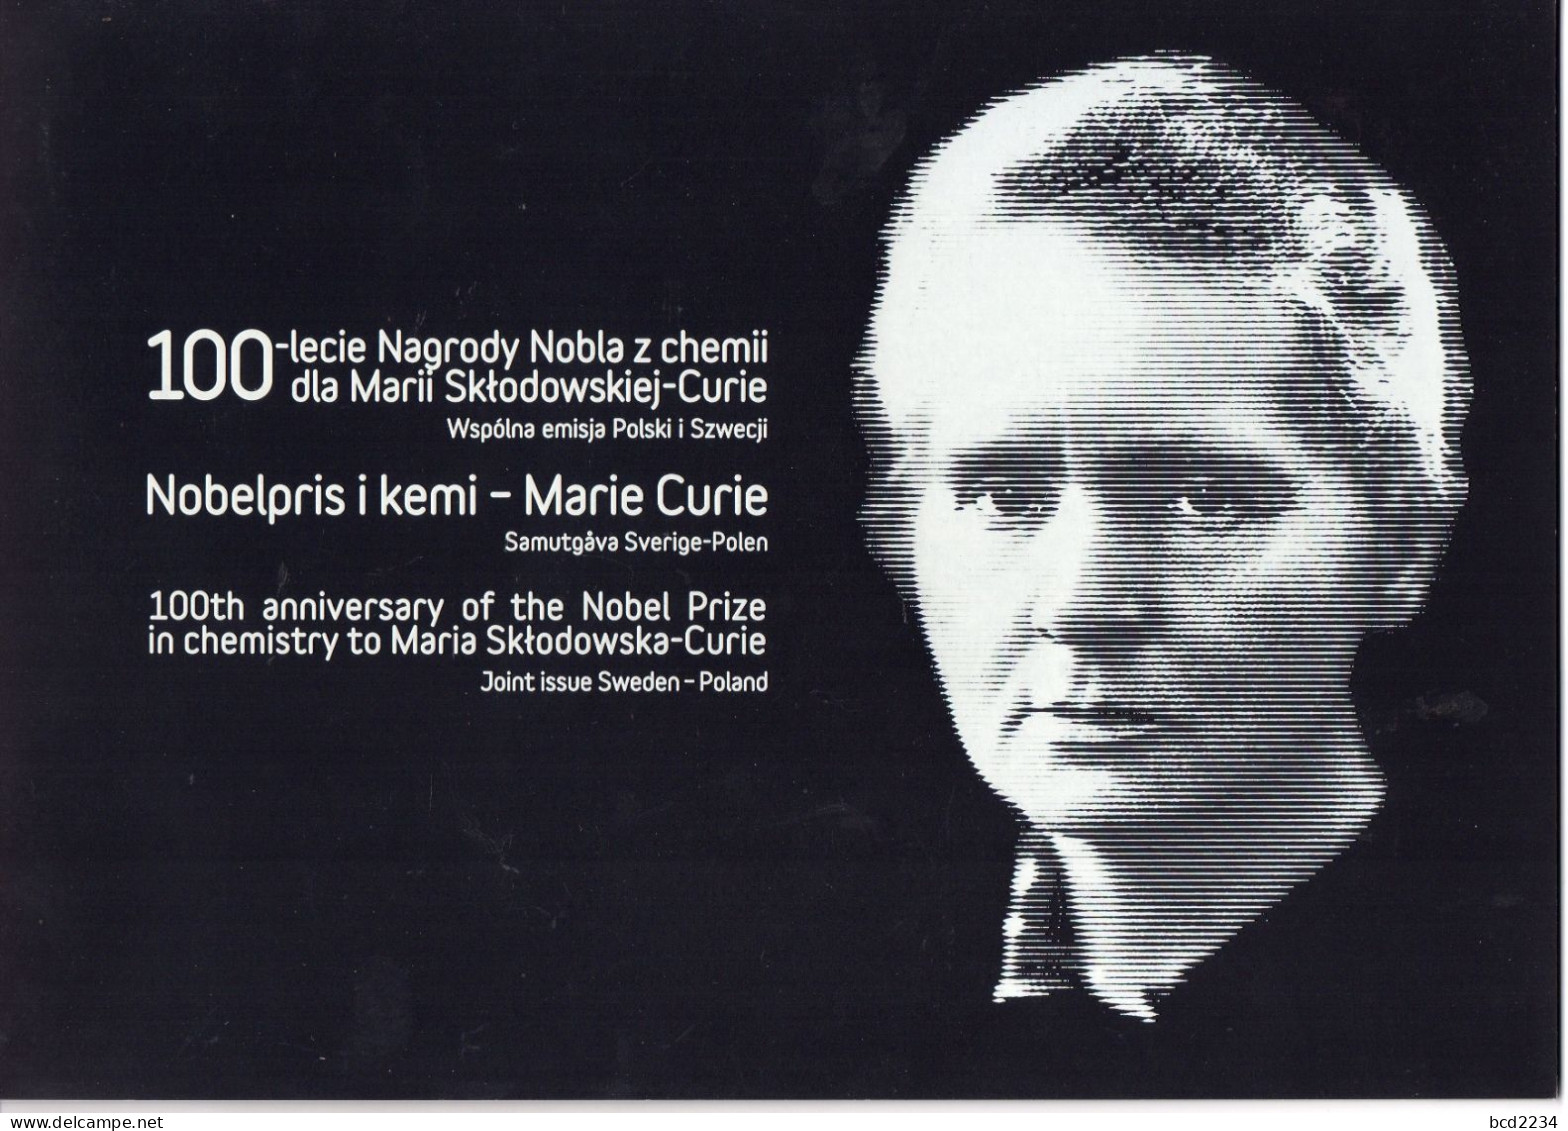 POLAND 2011 LIMITED EDITION: RARE 100TH ANNIVERSARY MARIE CURIE NOBEL PRIZE CHEMISTRY FOLDER FDC MS PL SWEDEN - Chimie